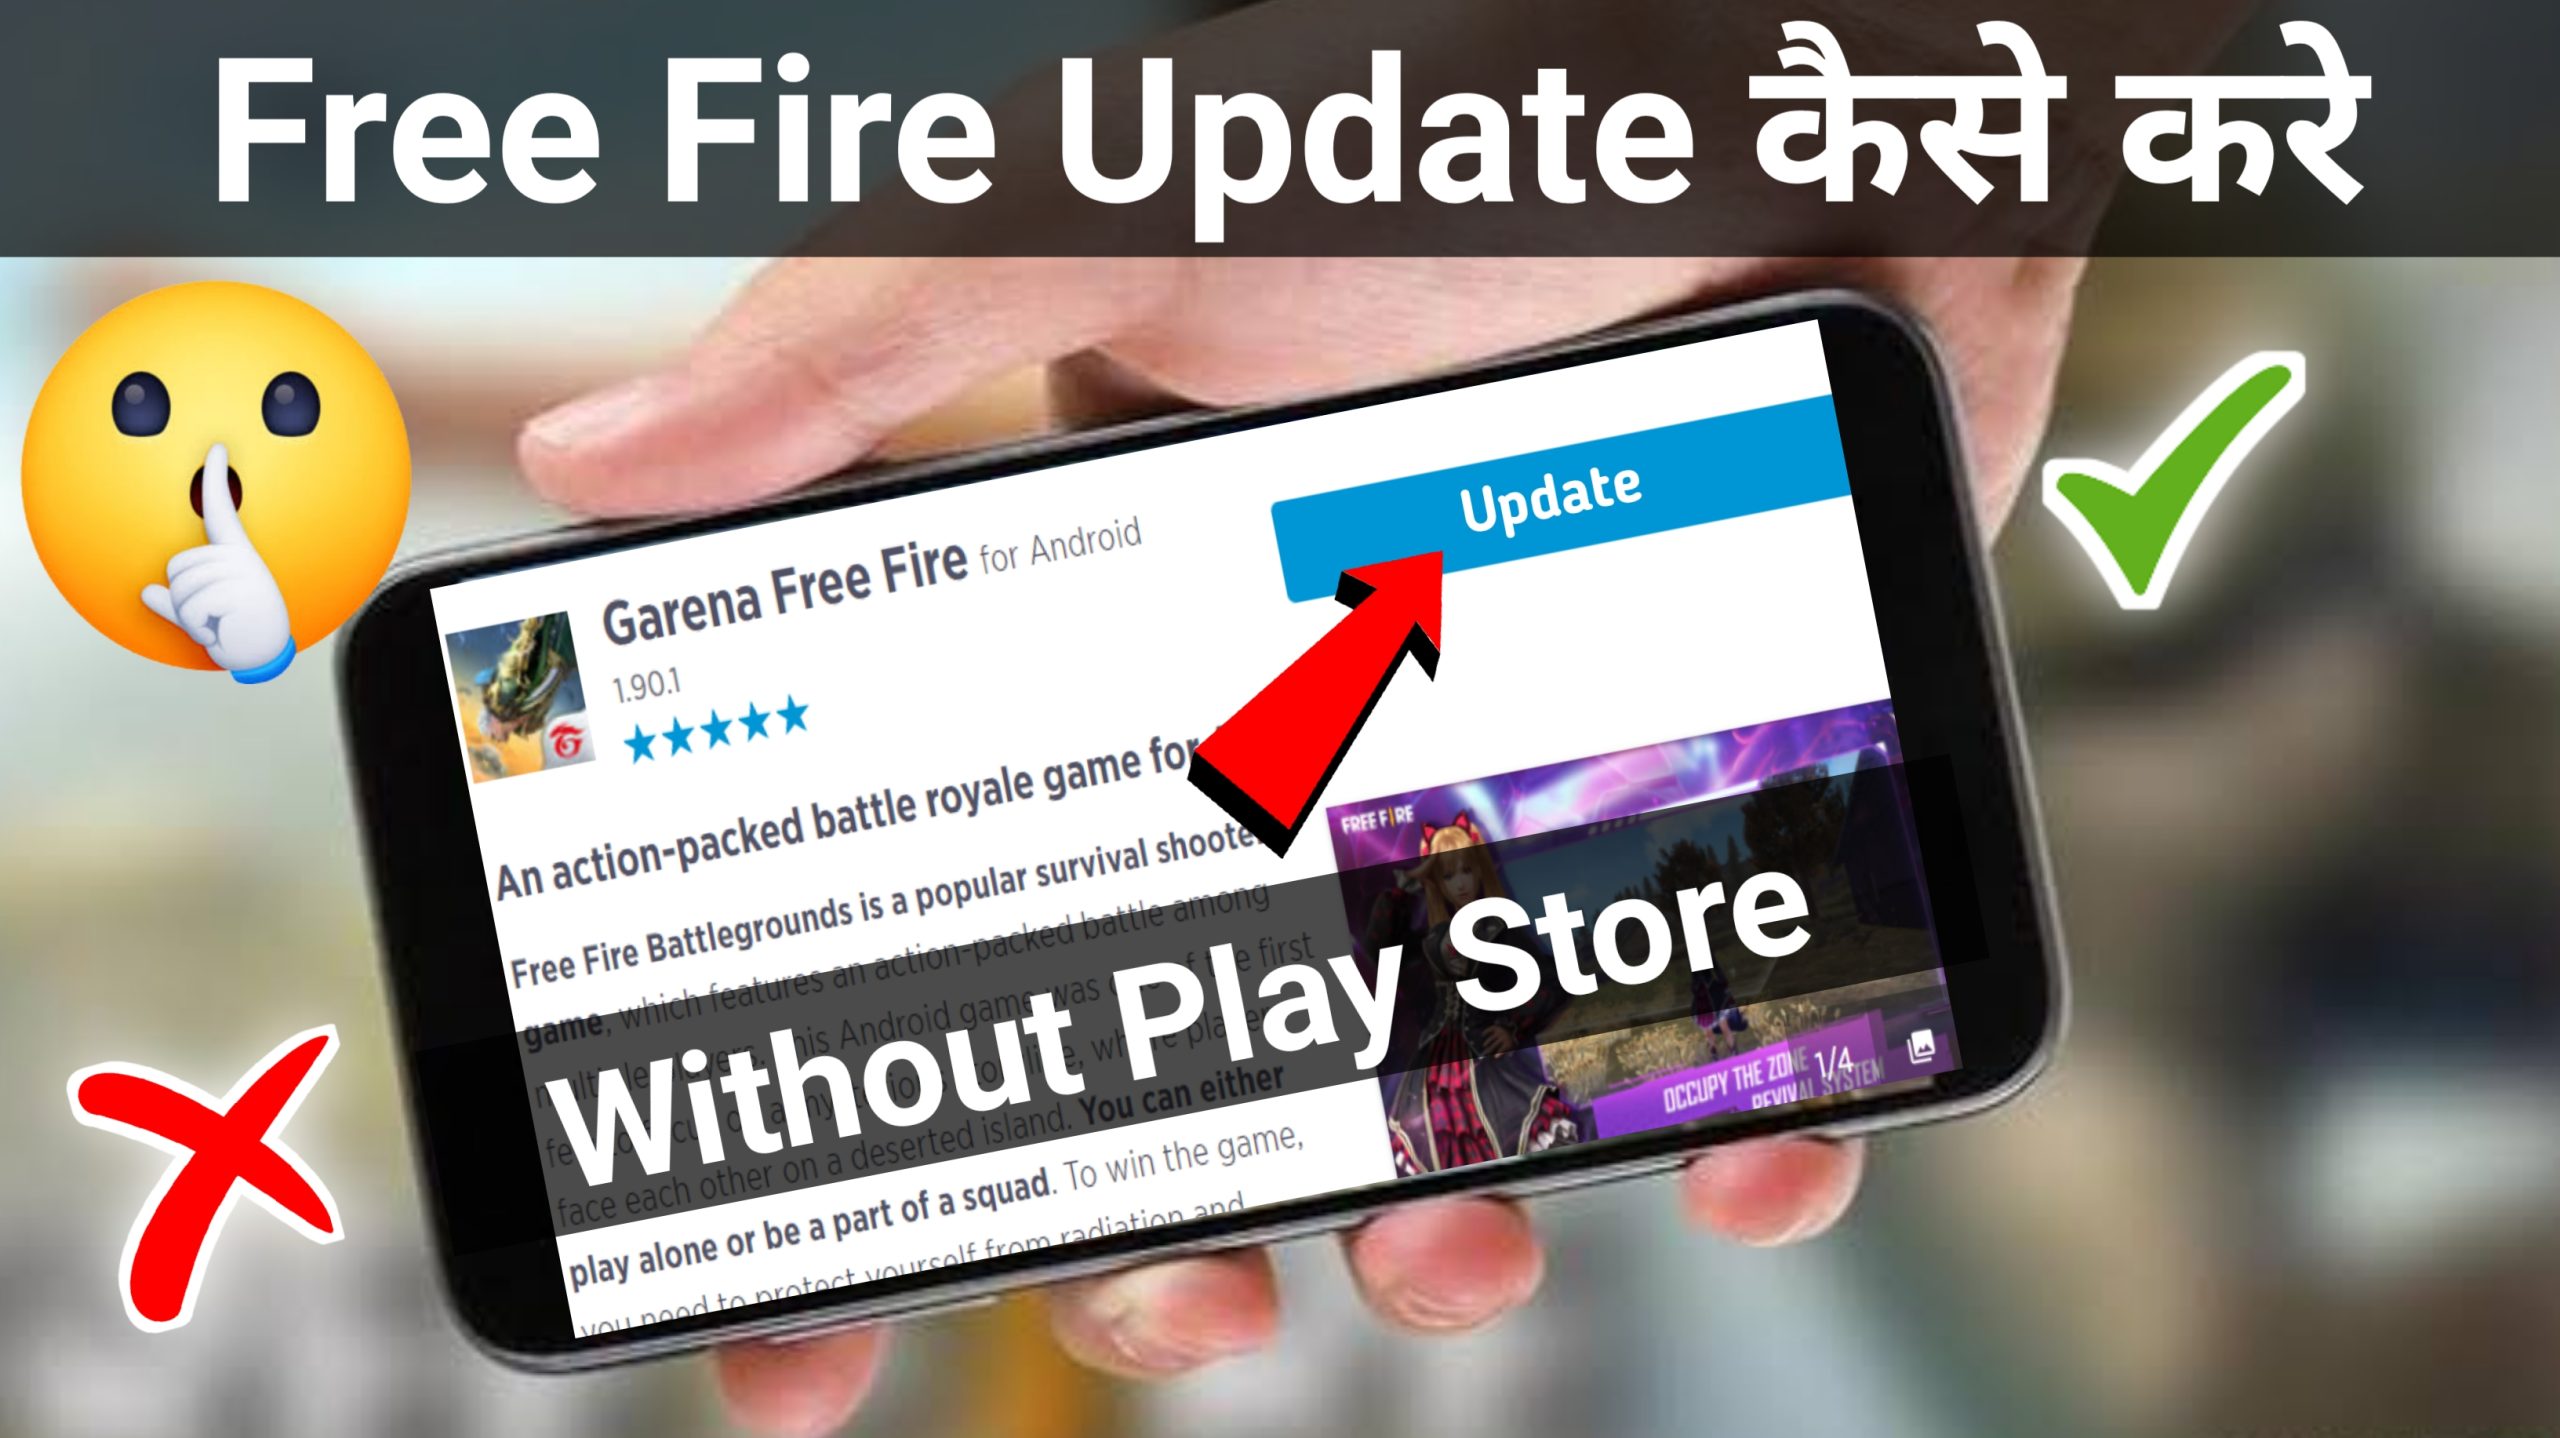 Free Fire Update Kaise Kare | How to Update Free Fire Without Play store 